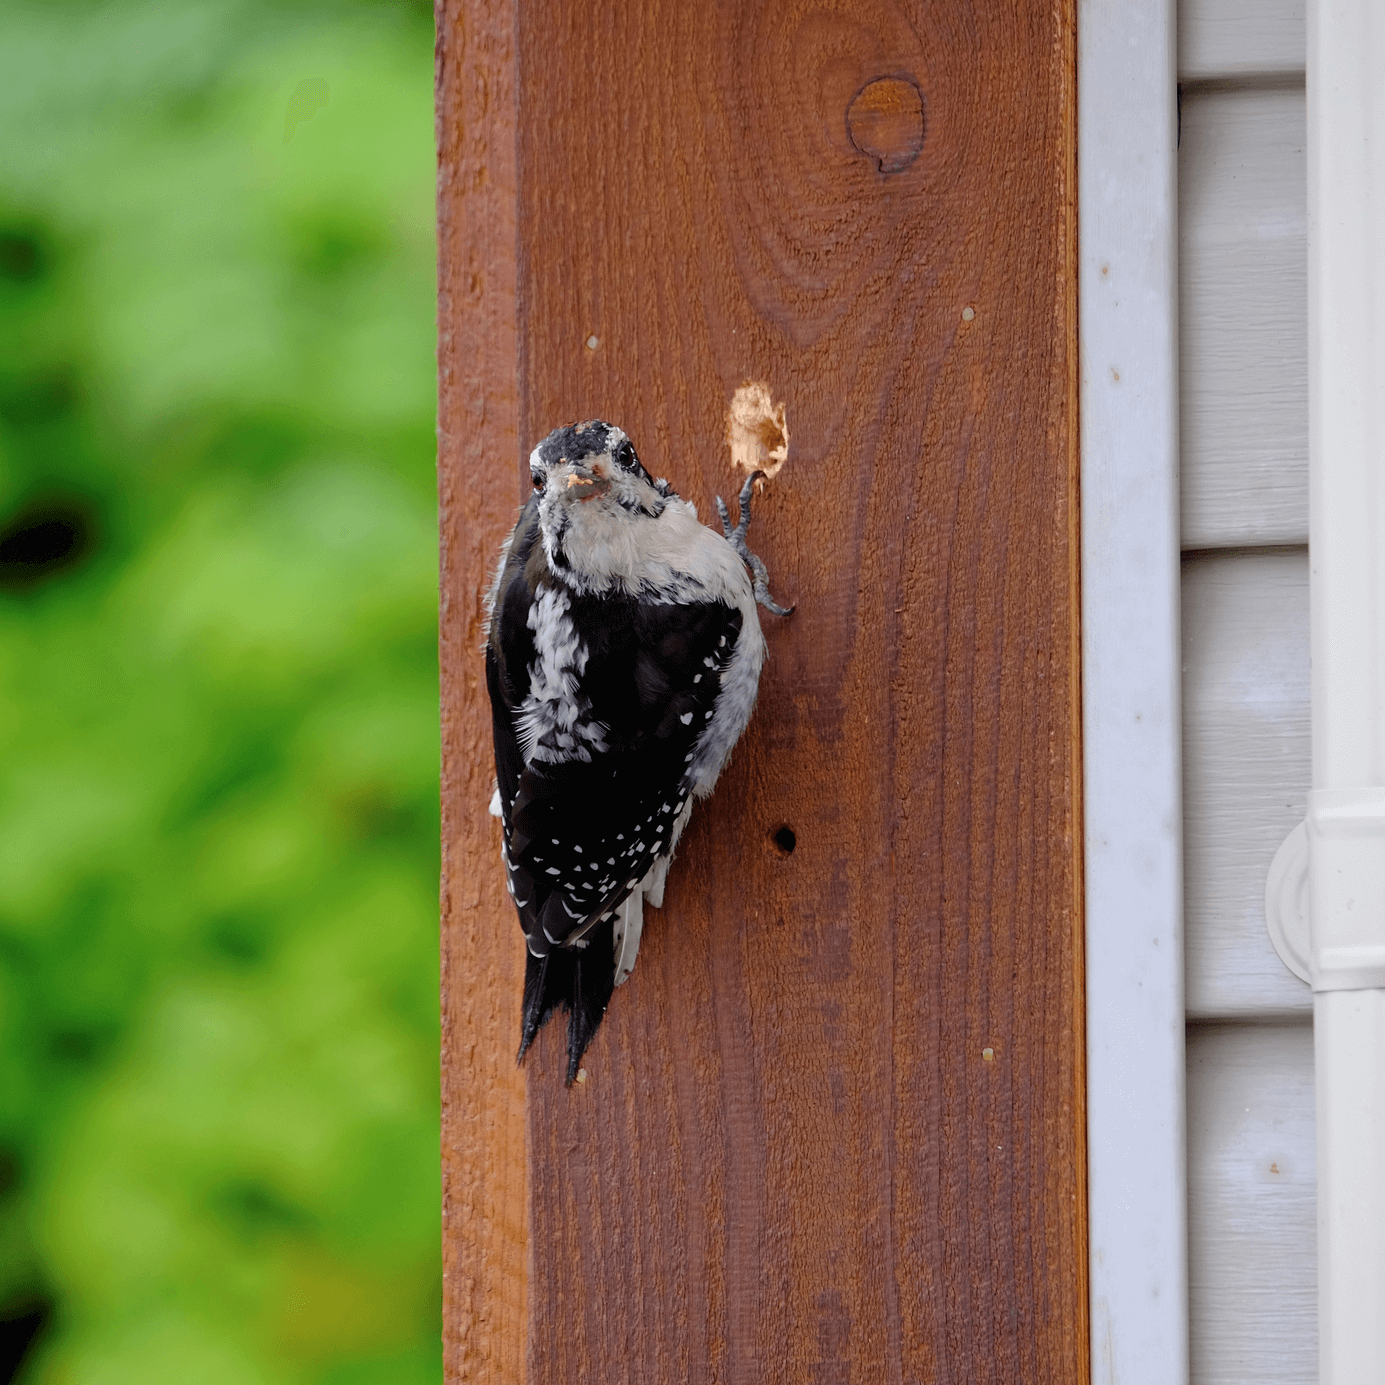 woodpecker comes knowing